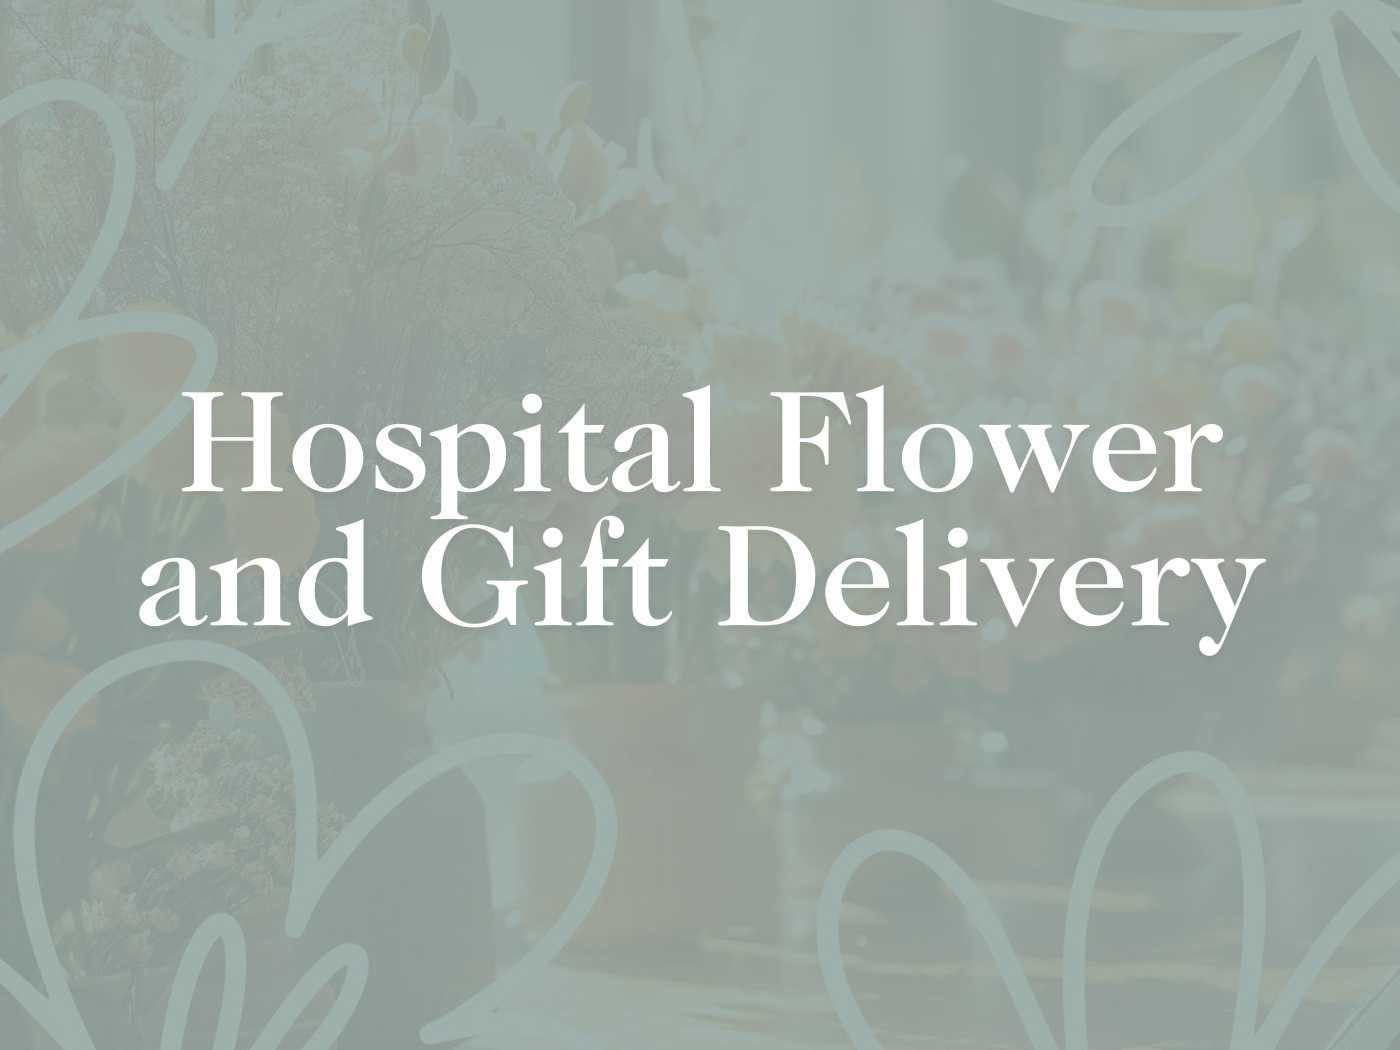 Elegant promotional banner for the Hospital Flower and Gift Delivery Collection, featuring a subtle floral and ribbon design with the text prominently displayed. Designed to convey warmth and thoughtfulness to private paying patients and staff, enhancing nursing services in South Africa. Fabulous Flowers and Gifts.